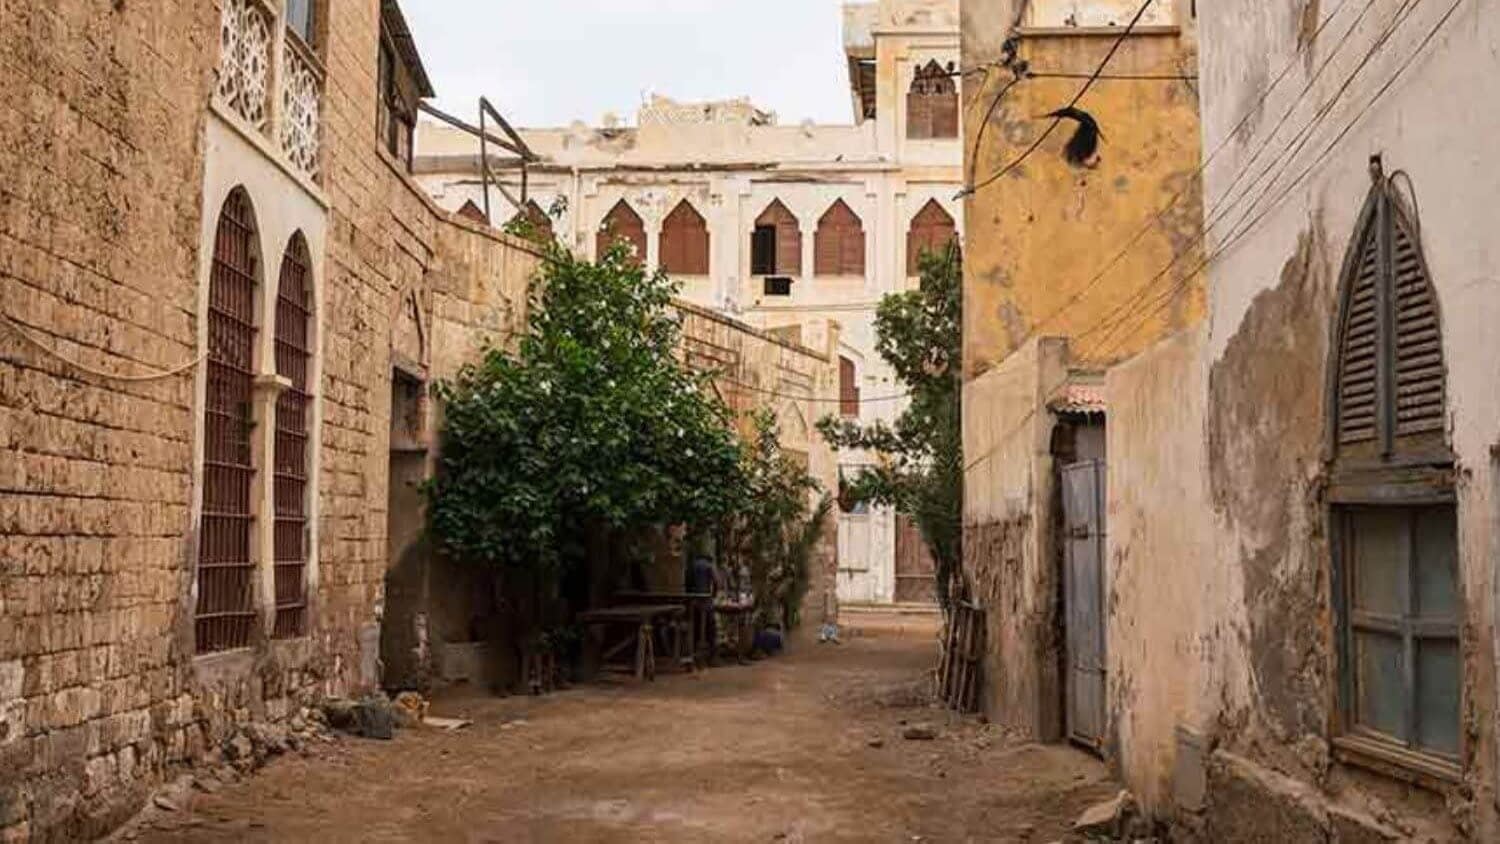 Massawa old town - Things to see and do in Eritrea